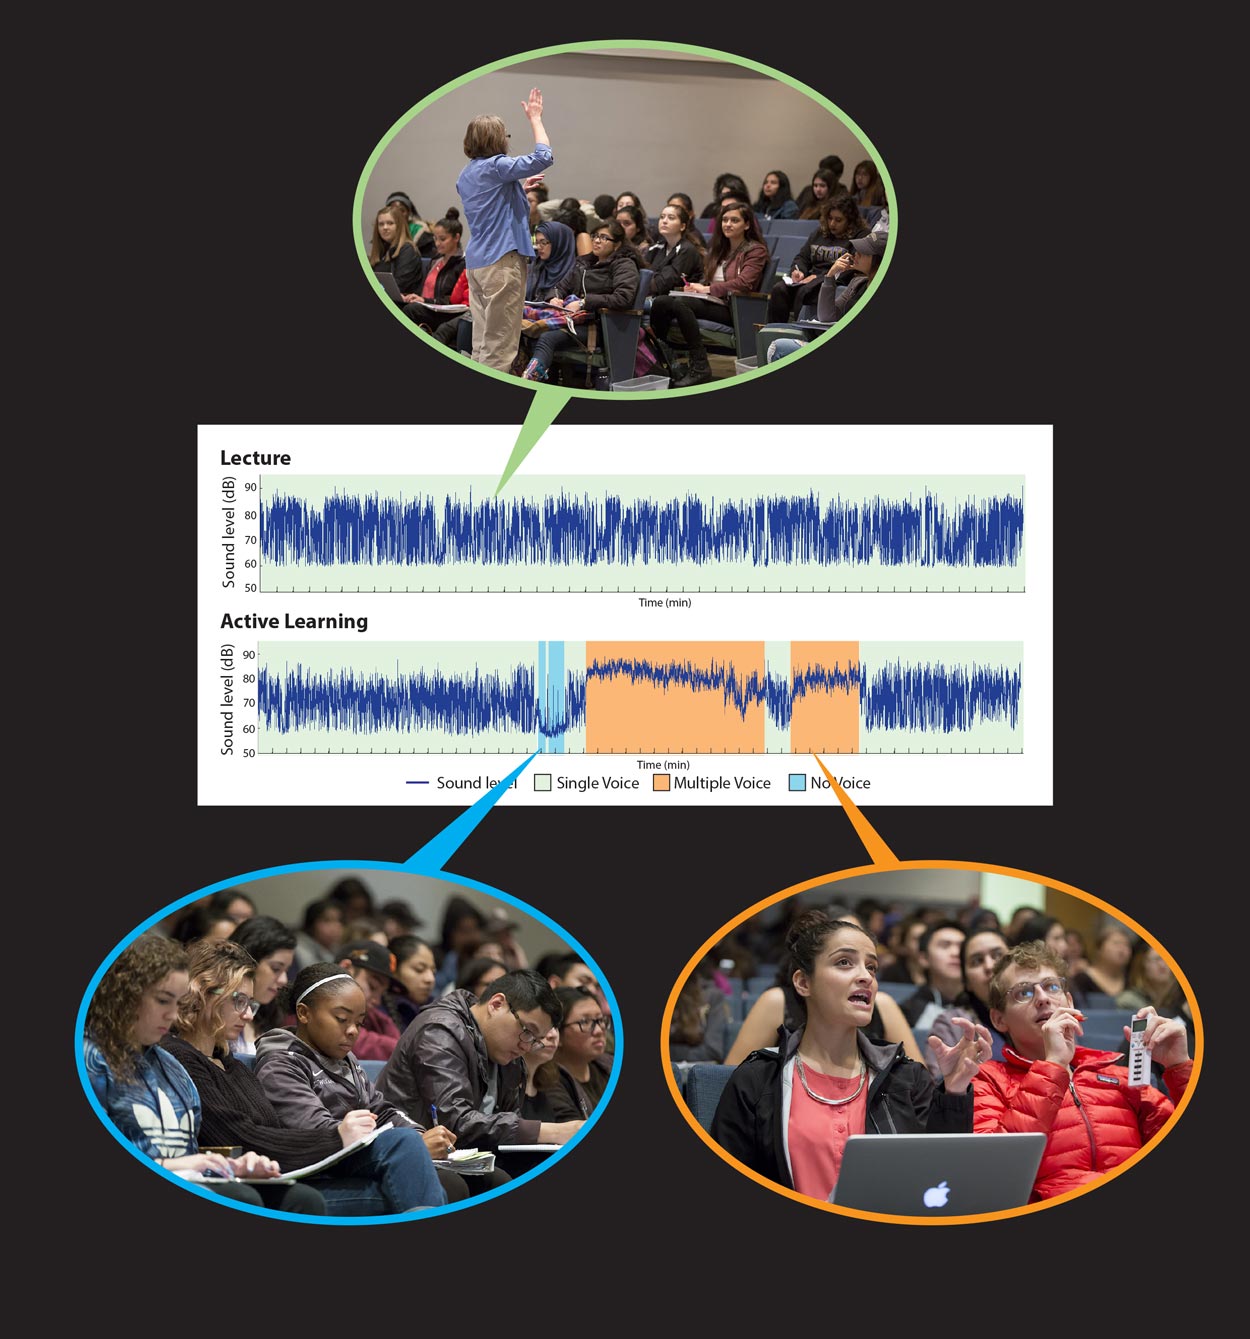 DART uses classroom sound levels (dark blue line) to estimate the extent of 'active learning' by classifying class time into these categories: Single Voice (e.g. lecture), Multiple Voice (e.g. pair and group discussions), and No Voice (e.g. student thinking or writing).